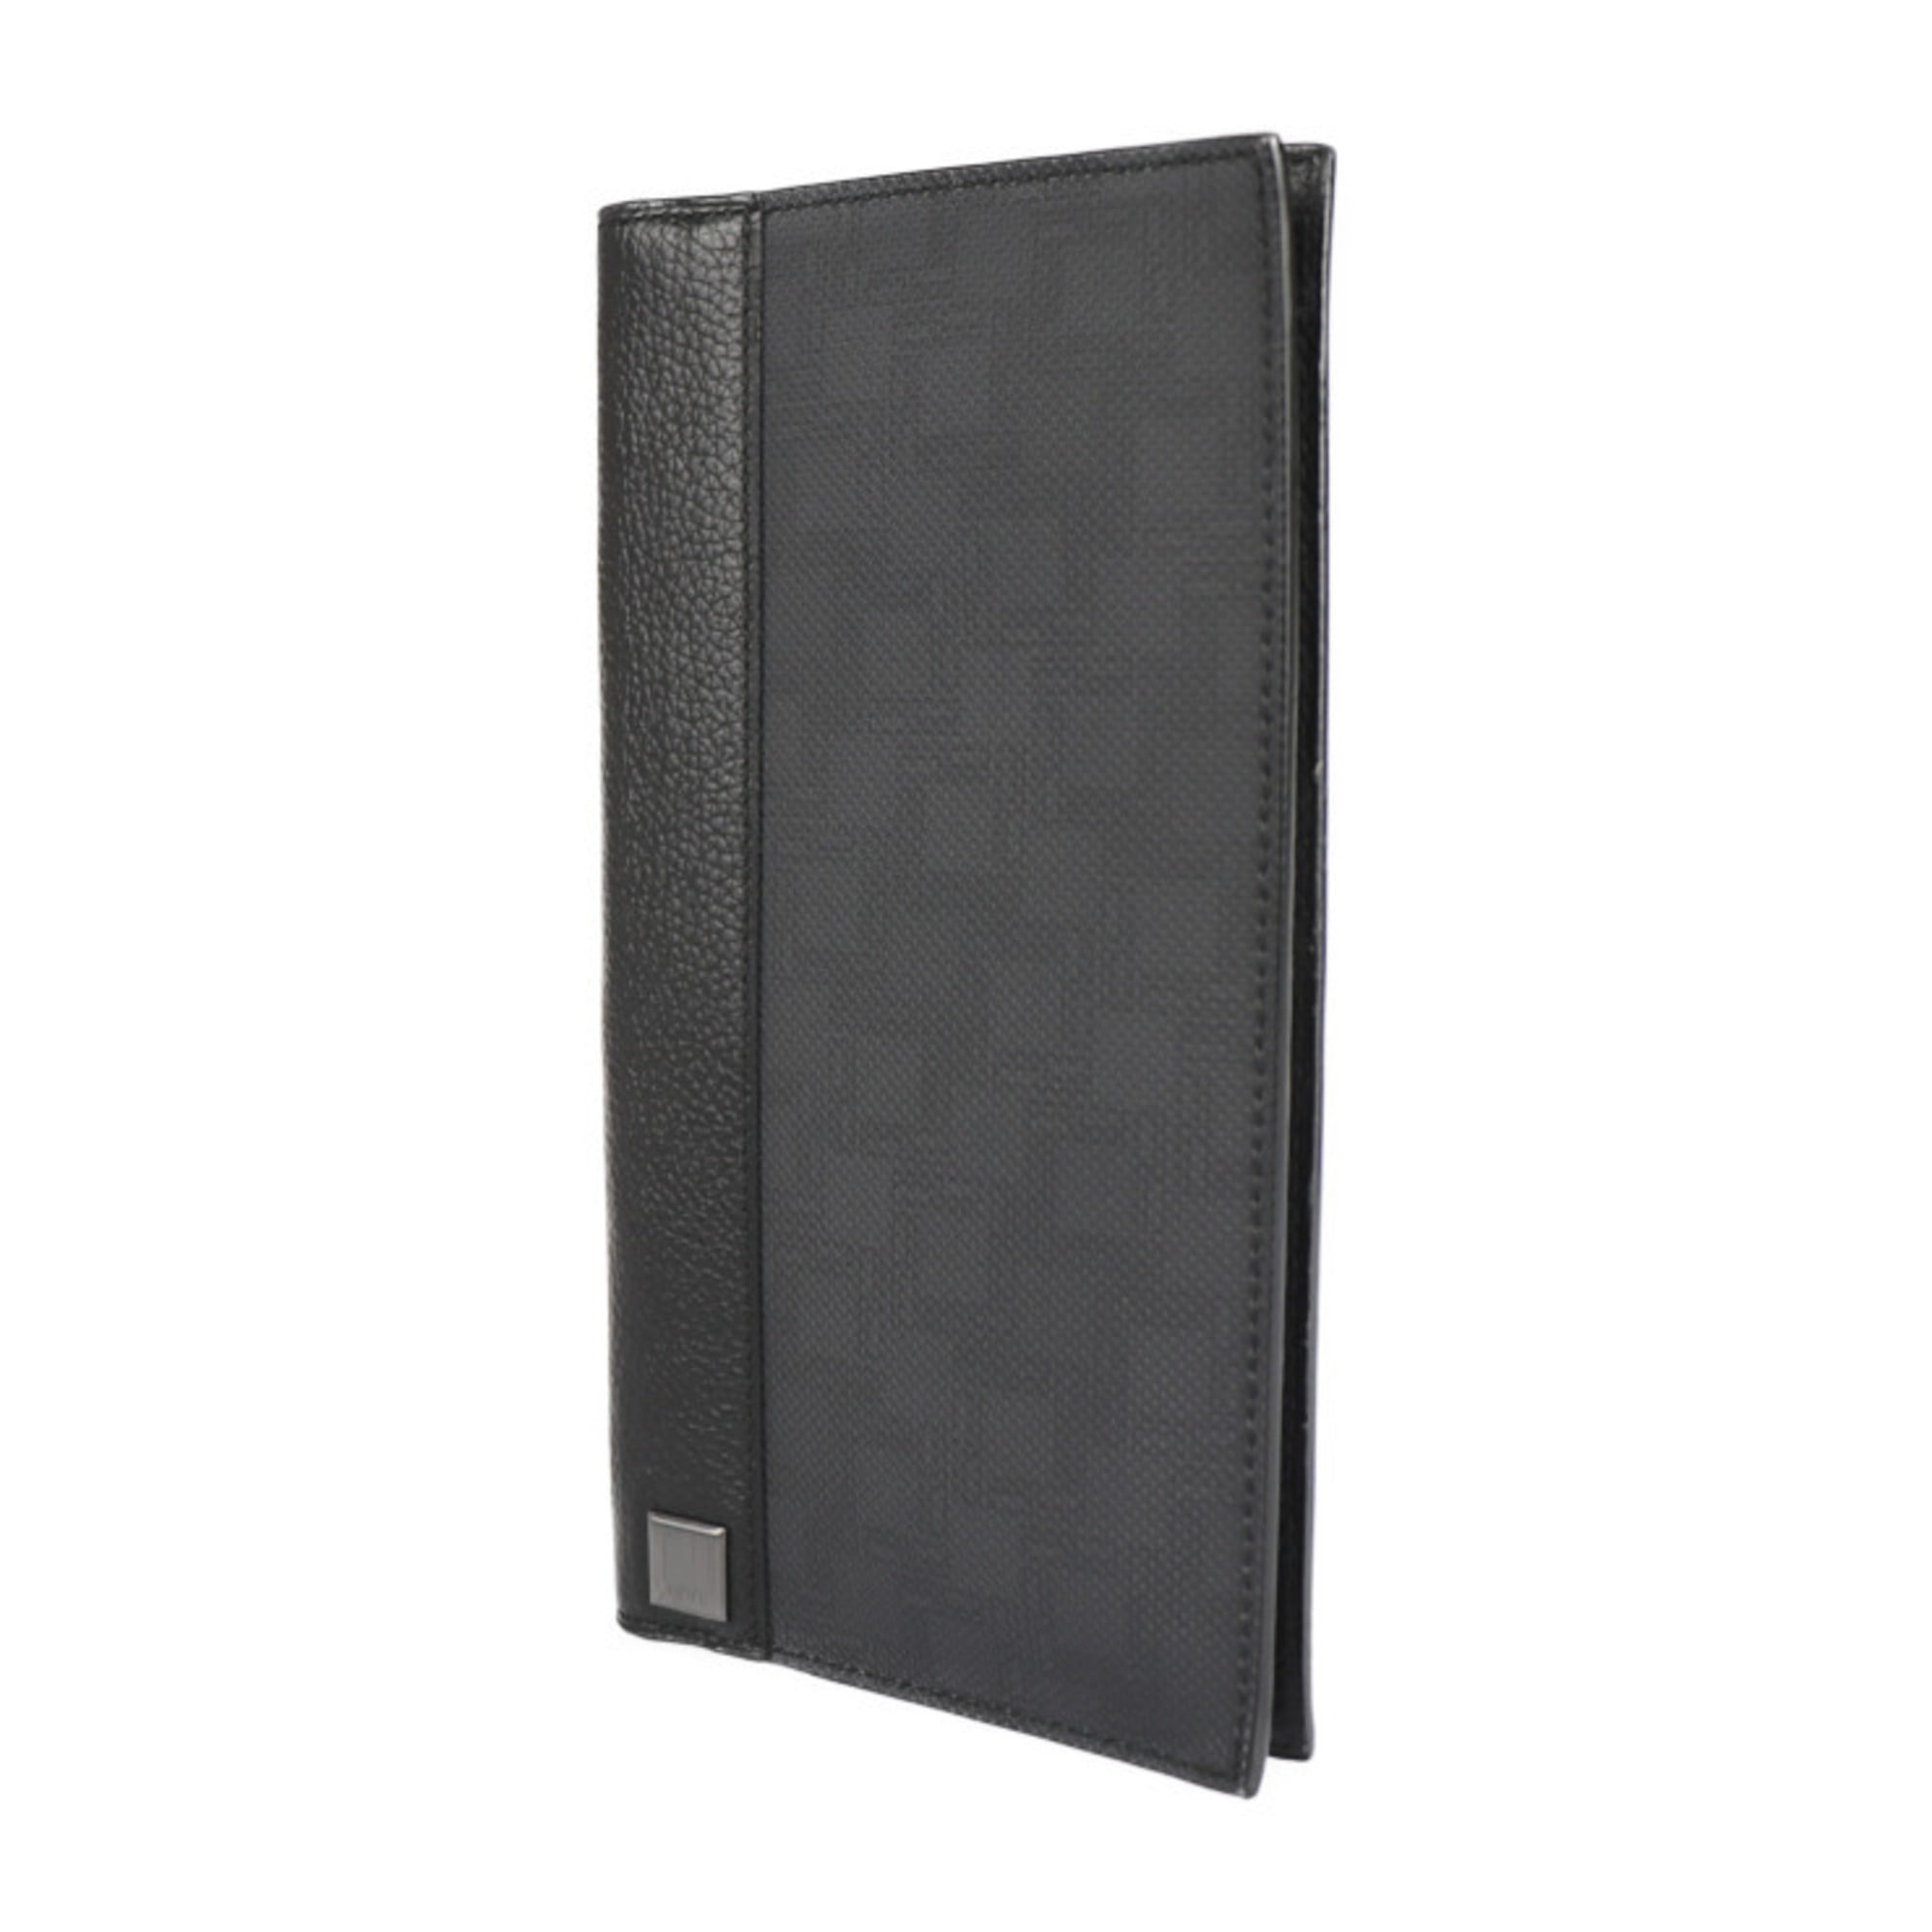 dunhill pvc/leather bifold walllet | www.vakilconsulting